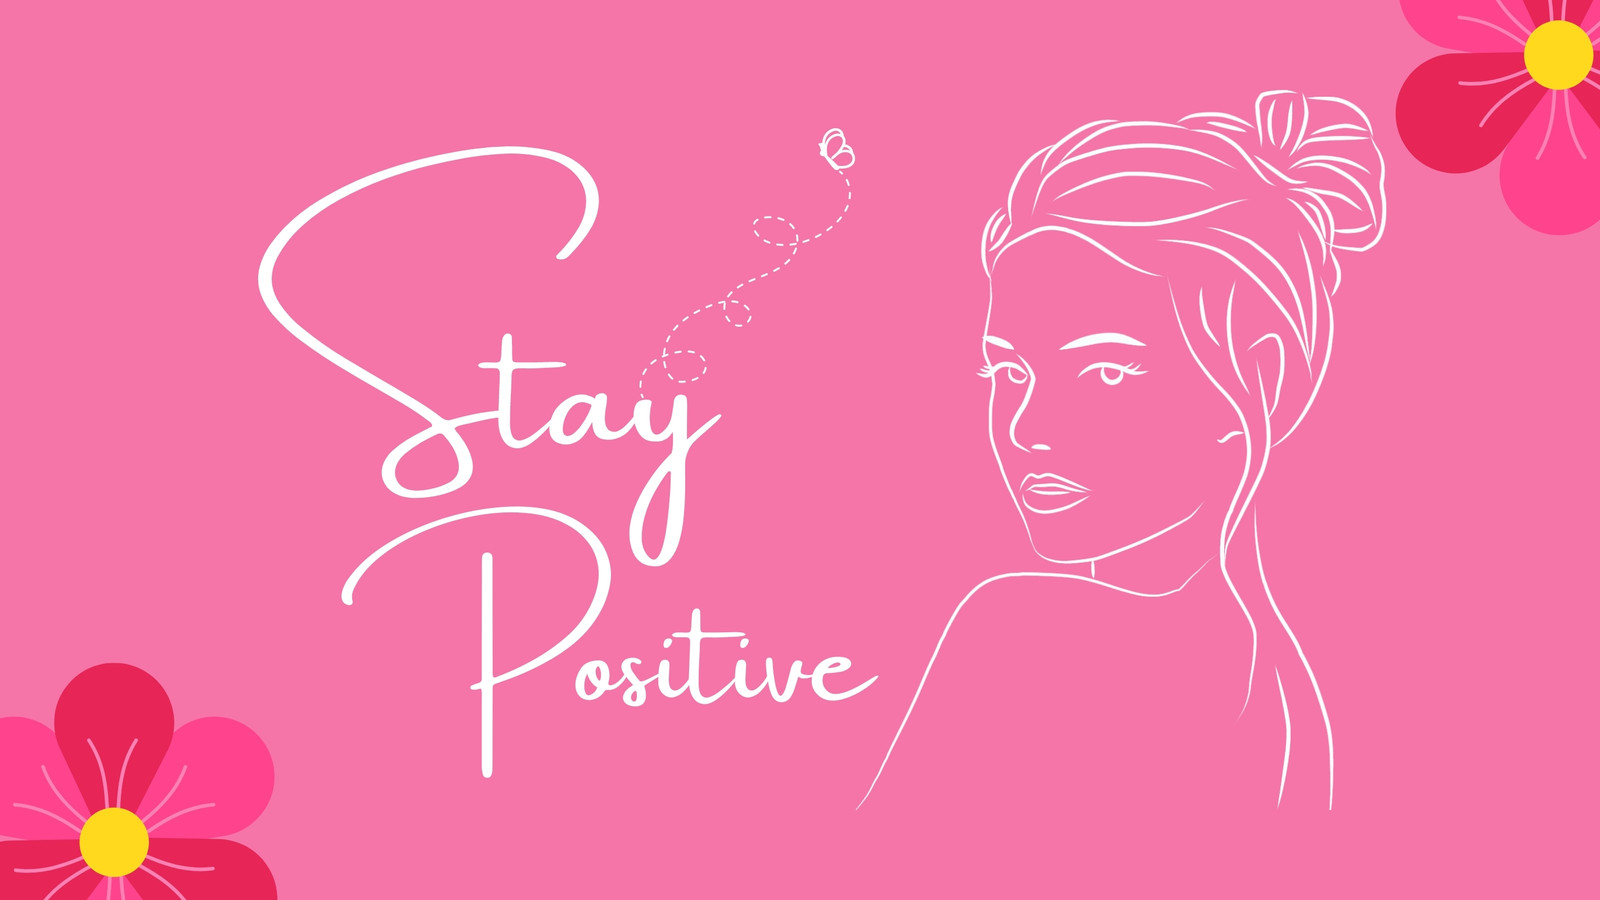 Stay Positive Inspirational Quote HD Motivational Wallpapers | HD Wallpapers  | ID #113444